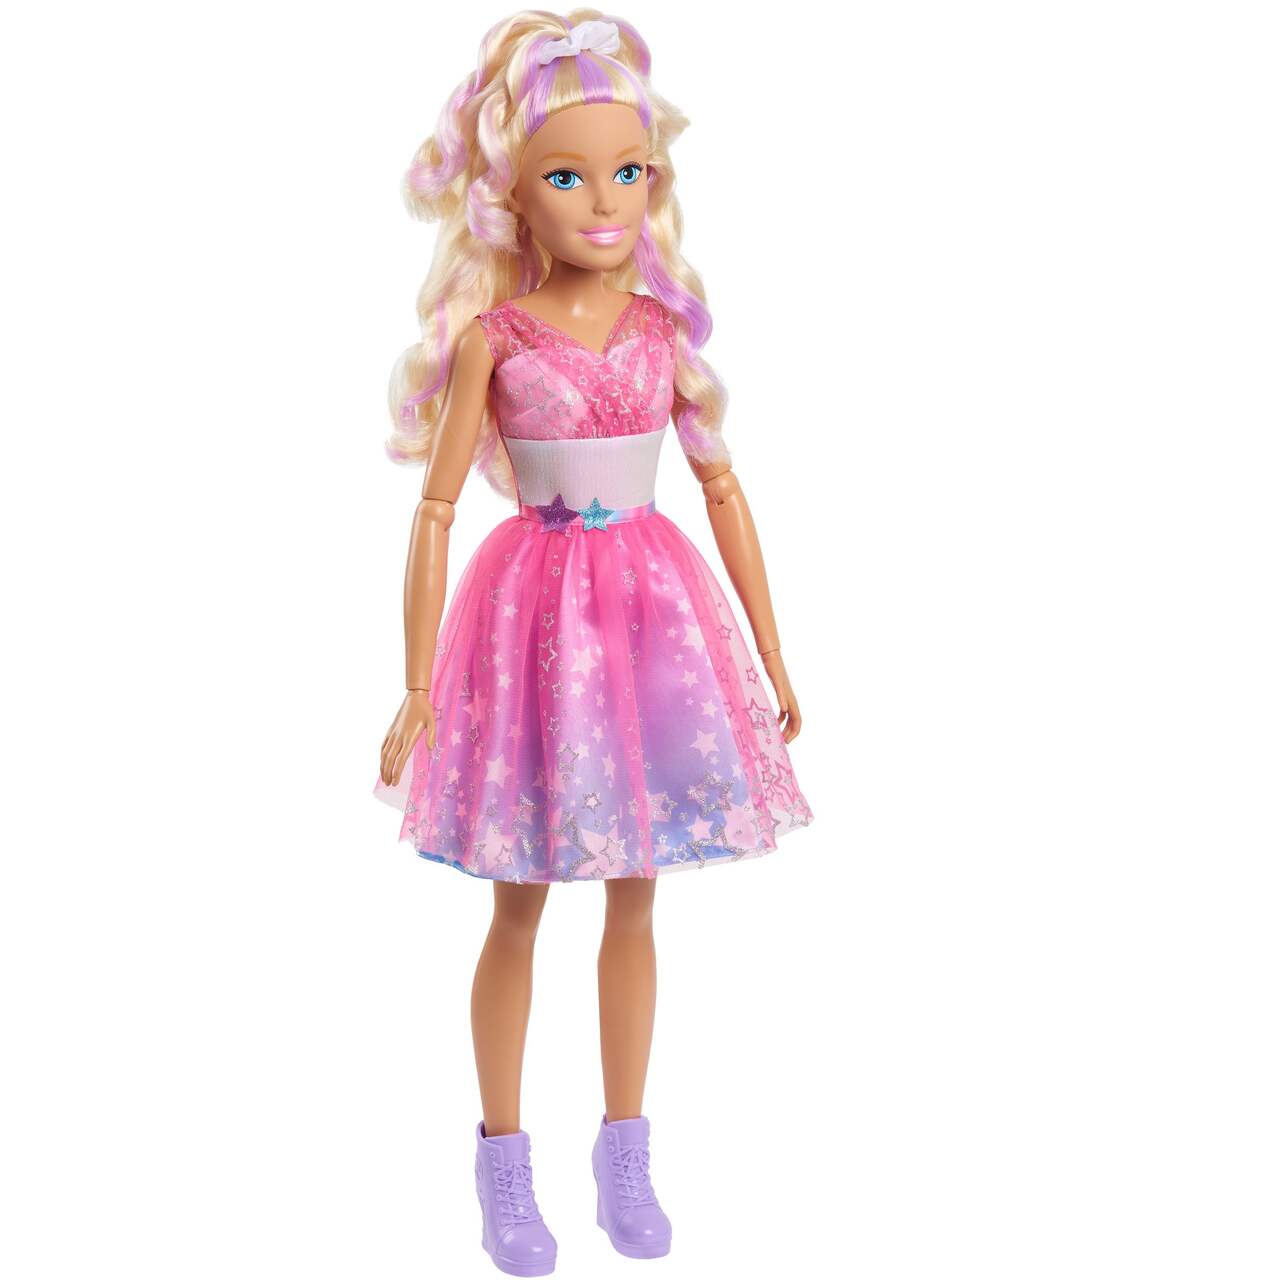 Barbie® Best Friend Modern-Day Princess Fashion Doll Toy For Kids, 28-in,  Ages 3+